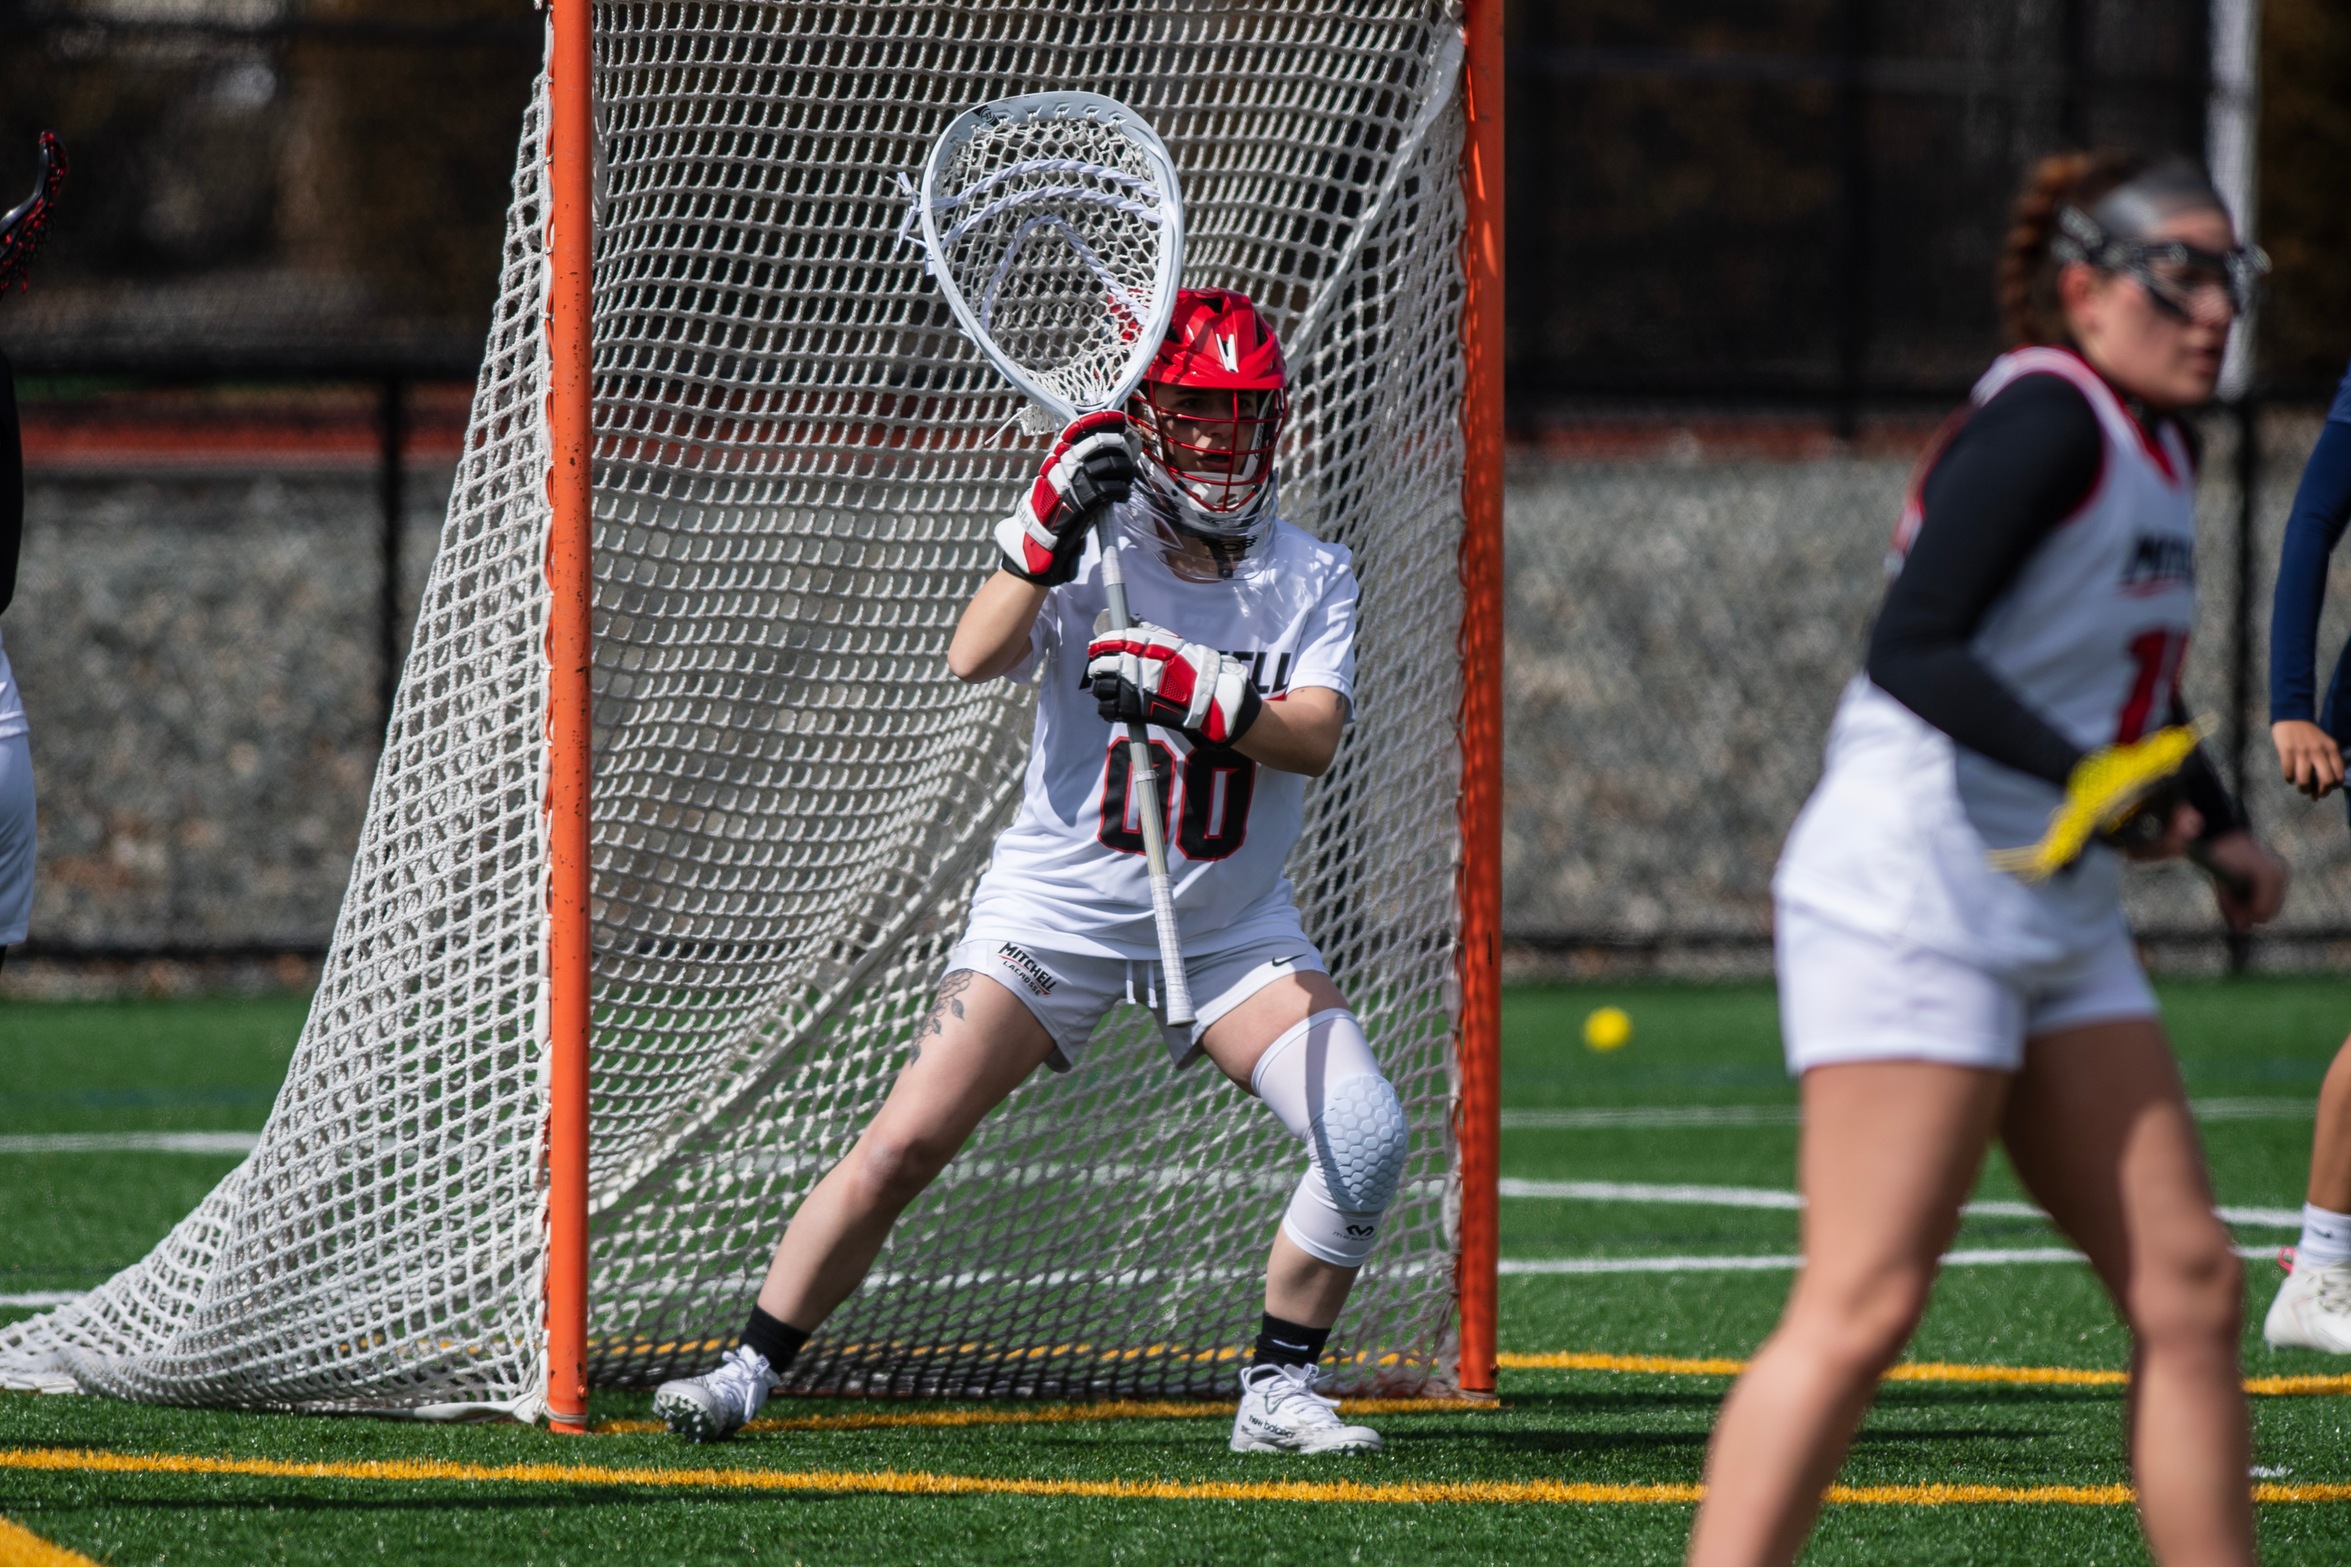 WLAX Suffers Home Loss Against Castleton